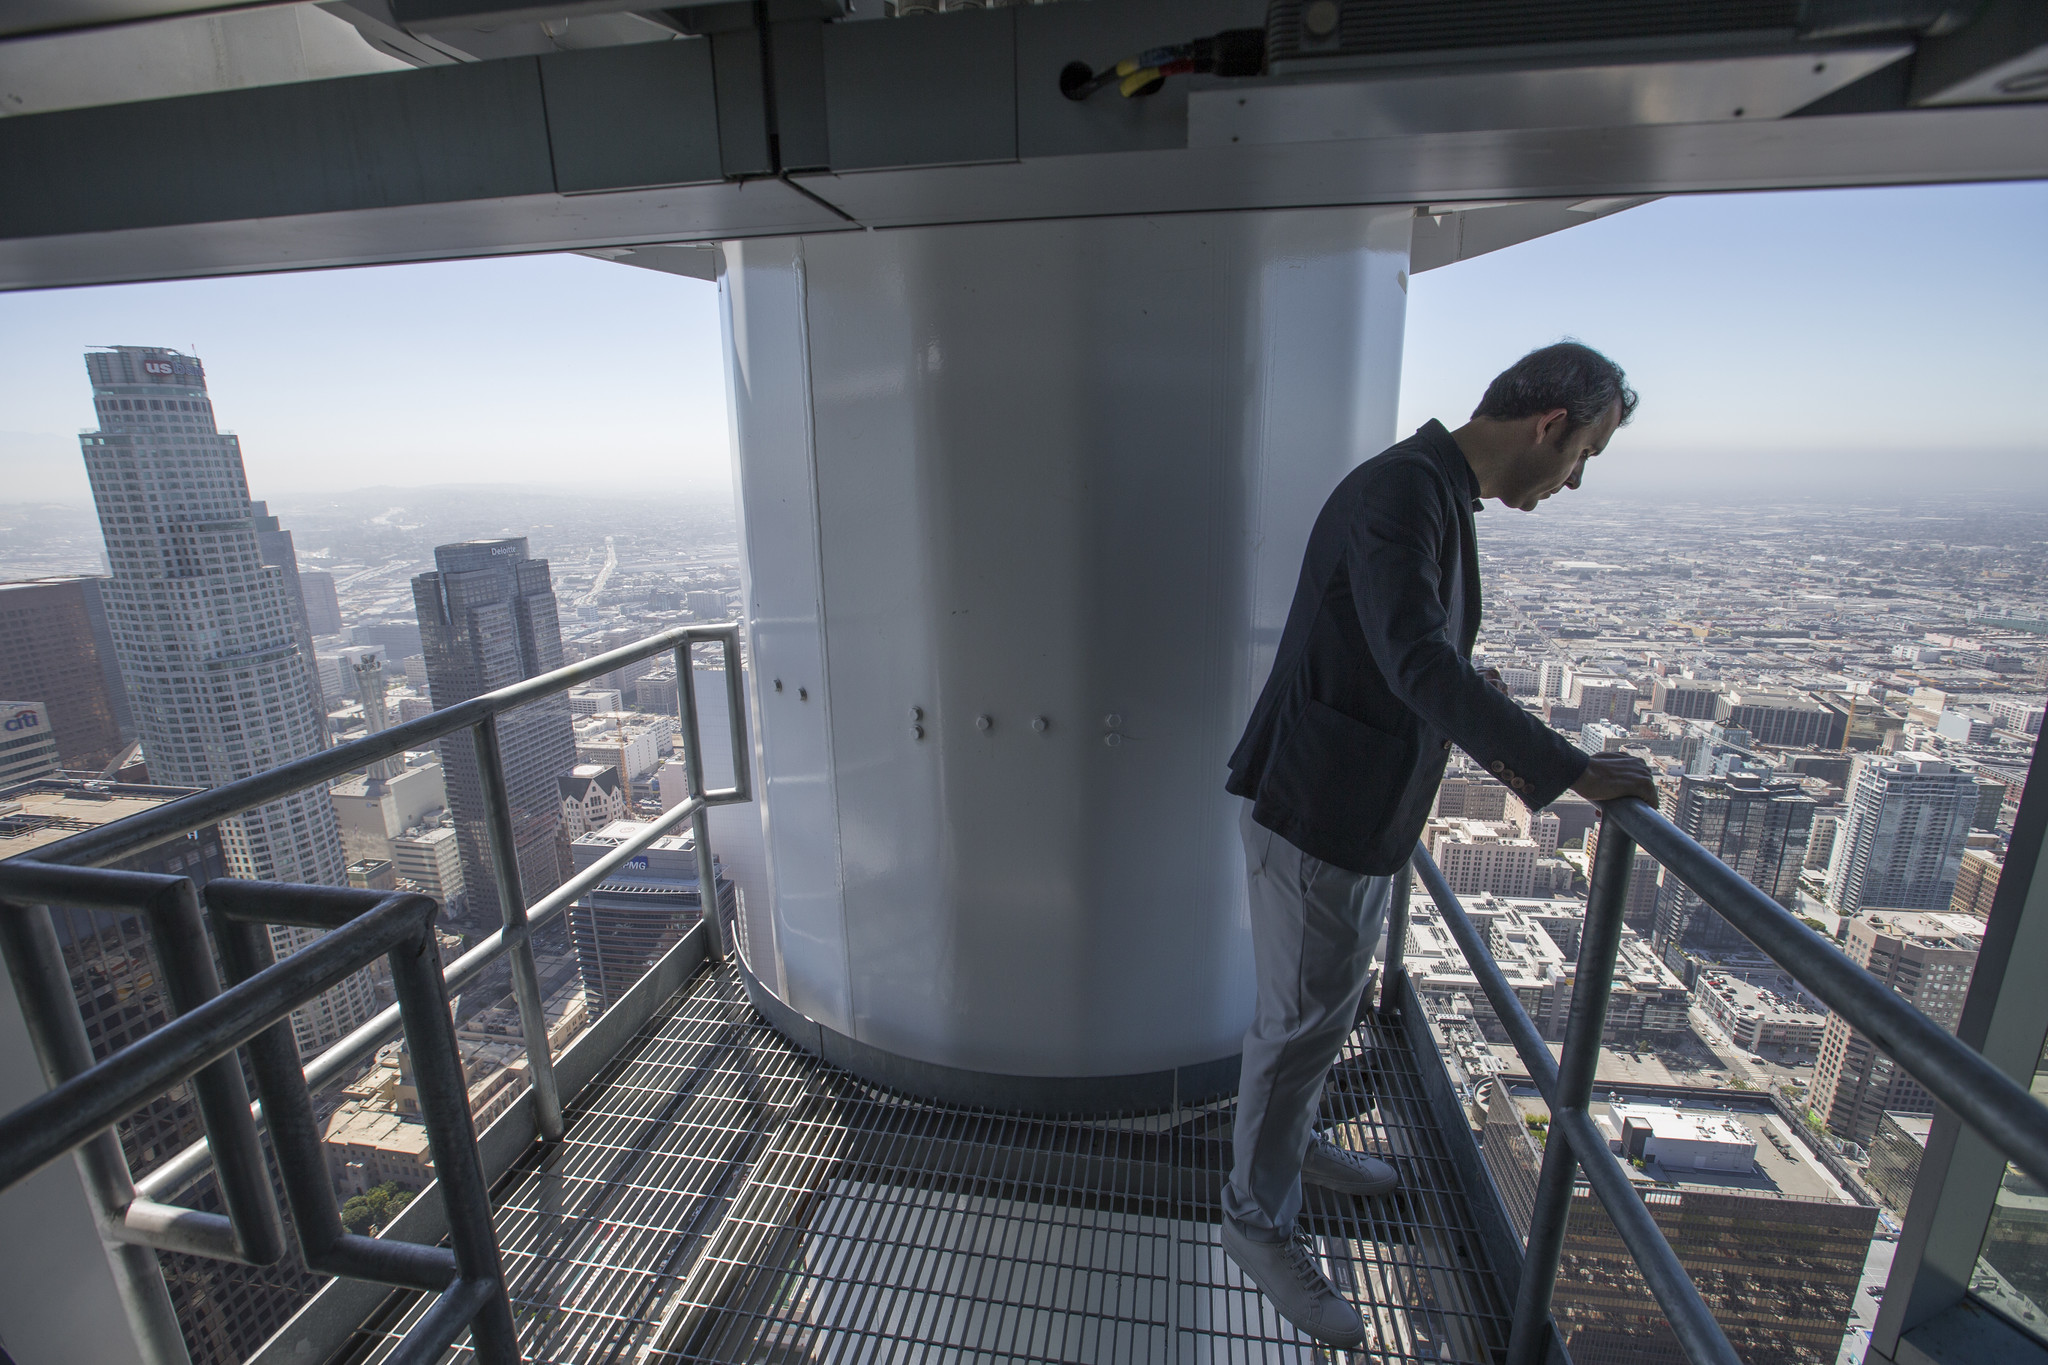 Brad Gwinn, StandardVision chief operations officer, looks out from inside the sail atop of the InterContinental Los Angeles bar on the 73rd floor of the Wilshire Grand Center.